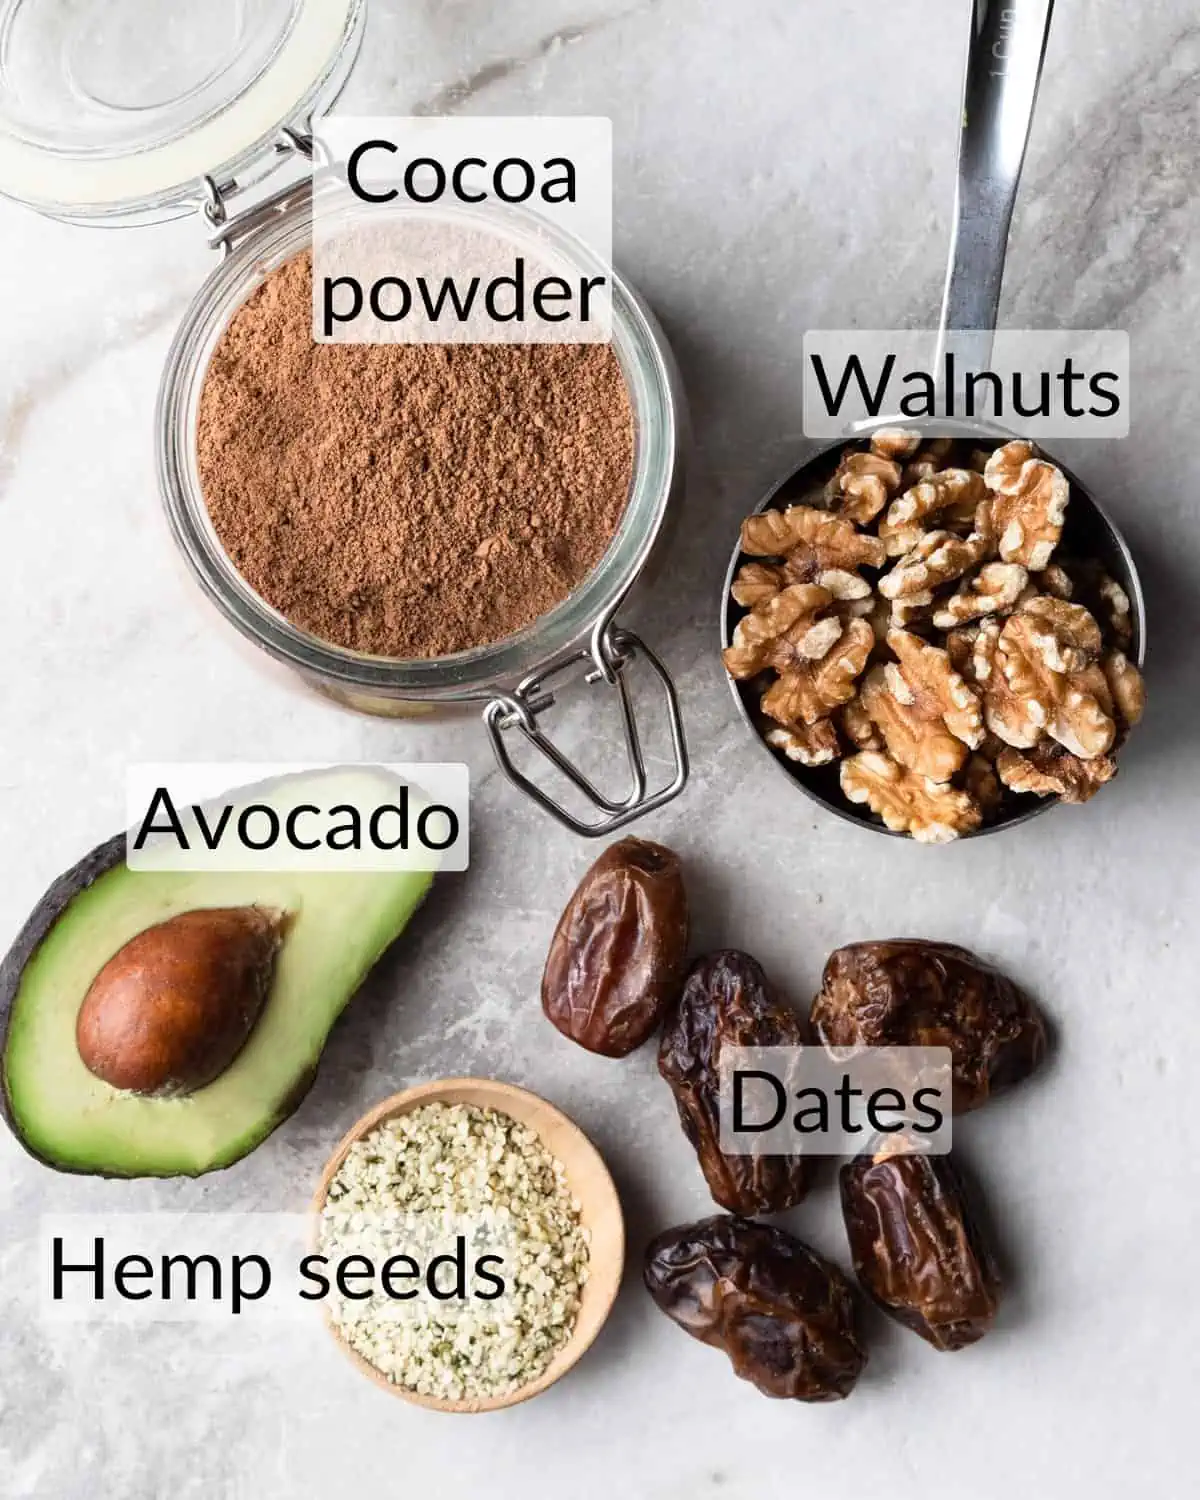 Ingredient shot of how to make healthy bliss balls. The recipe includes dates, hemp seeds, walnuts, avocado and cocoa powder.